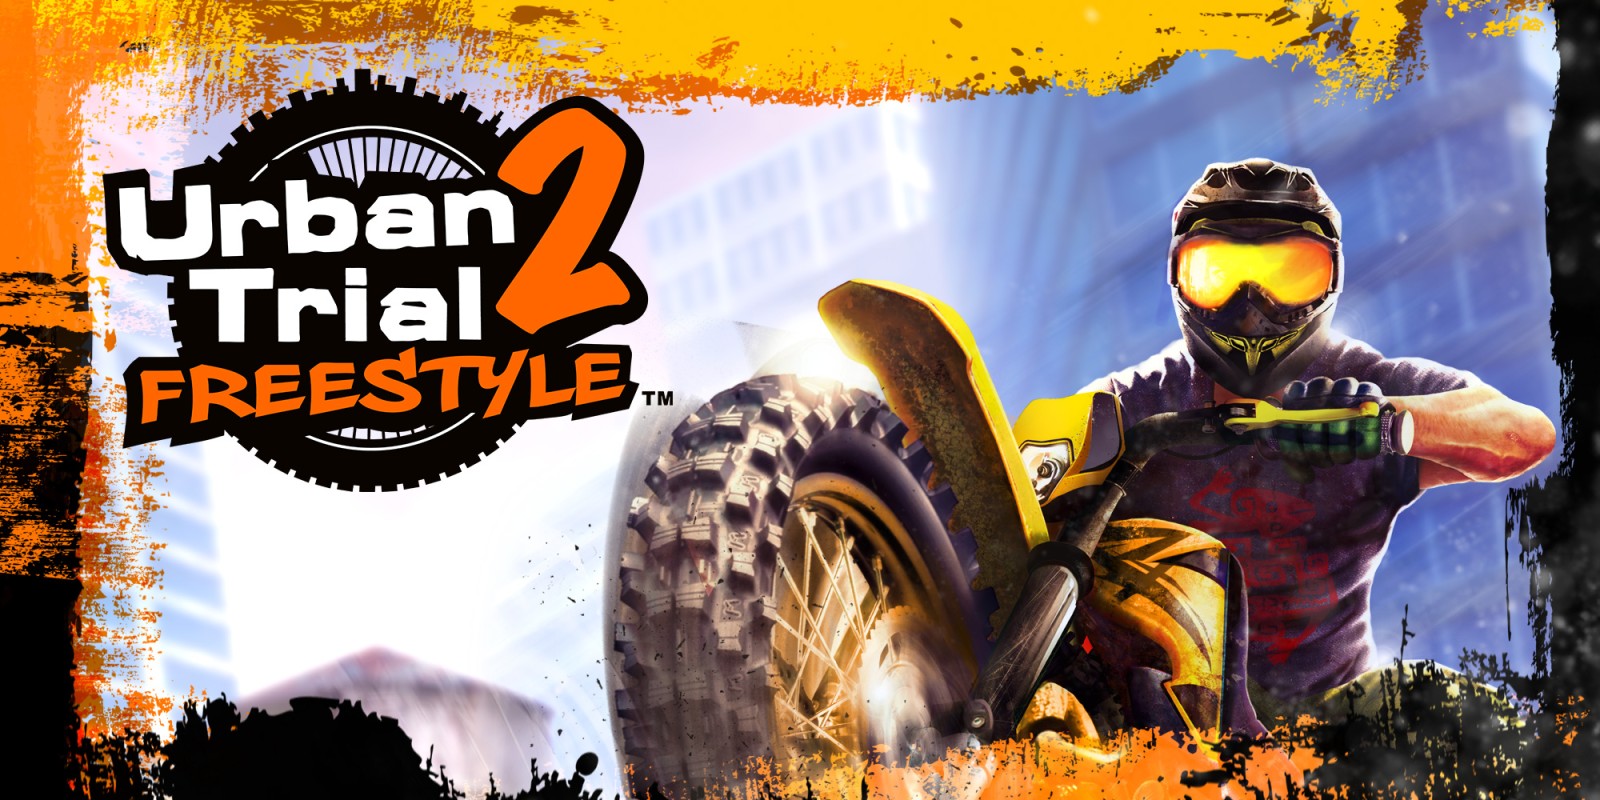 Urban trial freestyle pc download